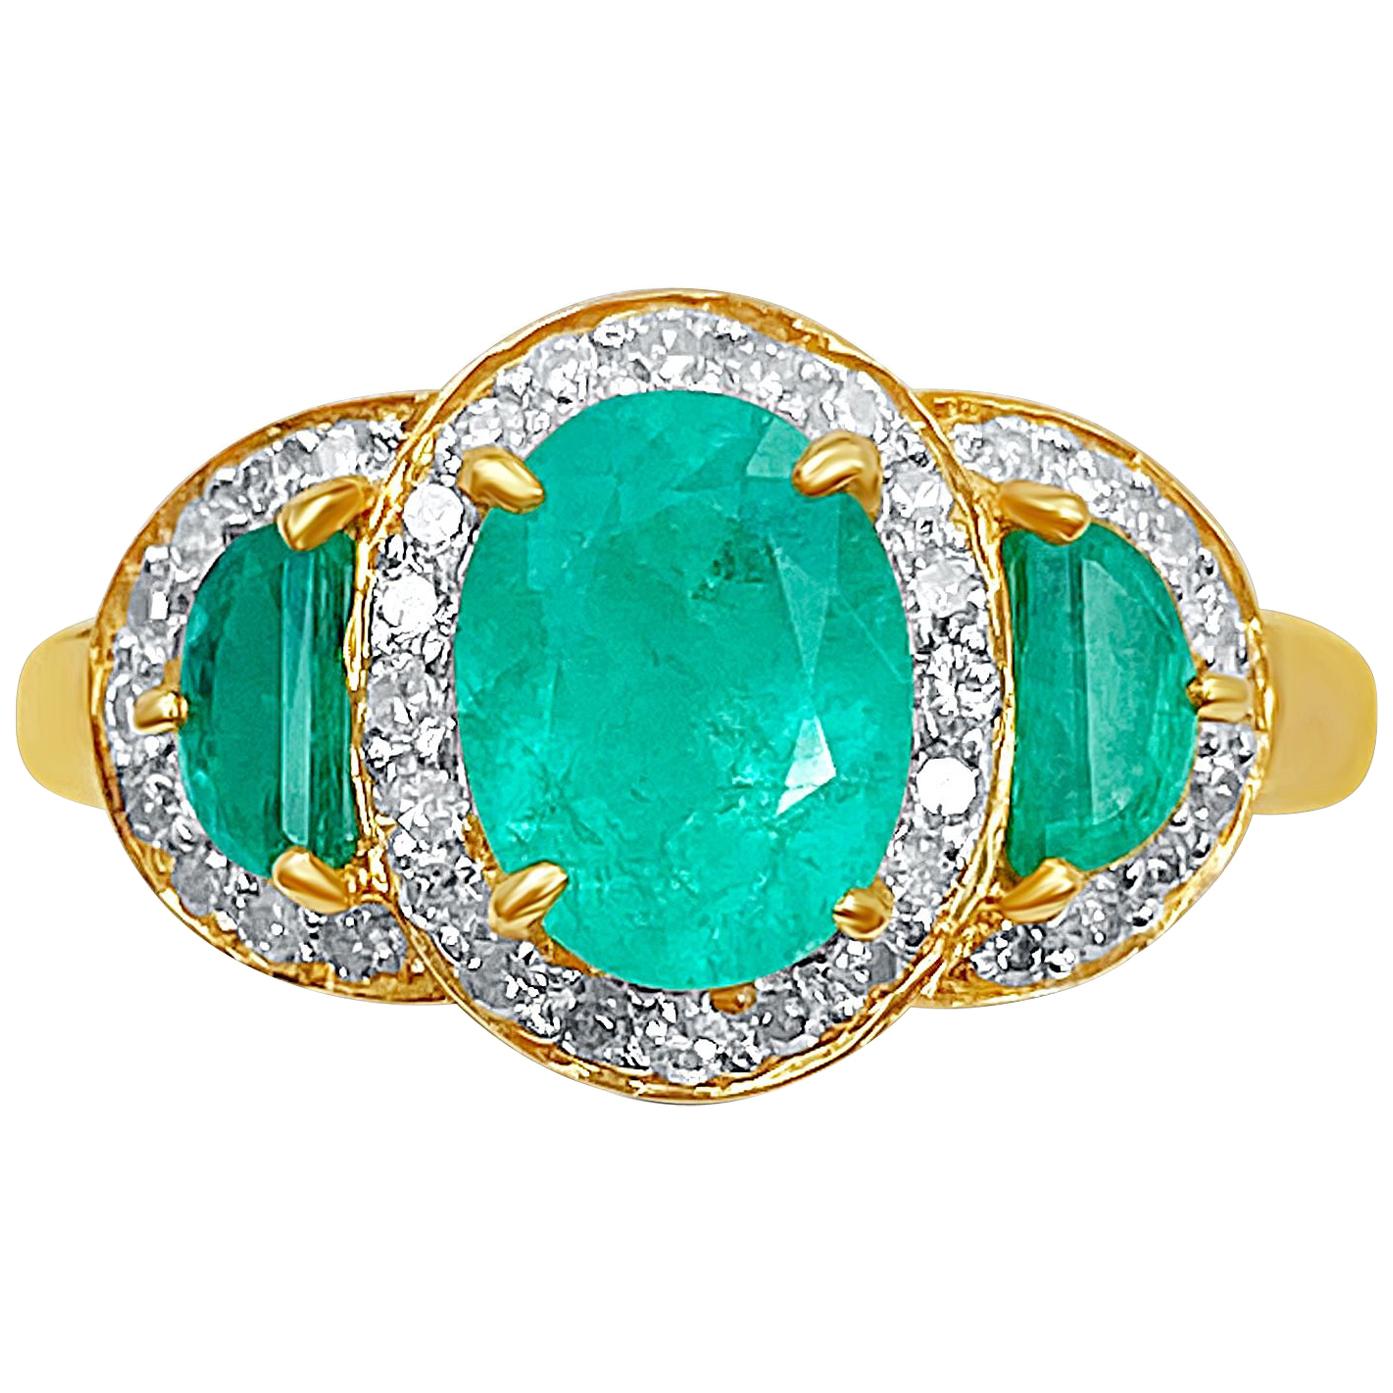 1.60 Carat Oval Cut Colombian Emerald, Diamond, and 18K Yellow Gold Ring For Sale